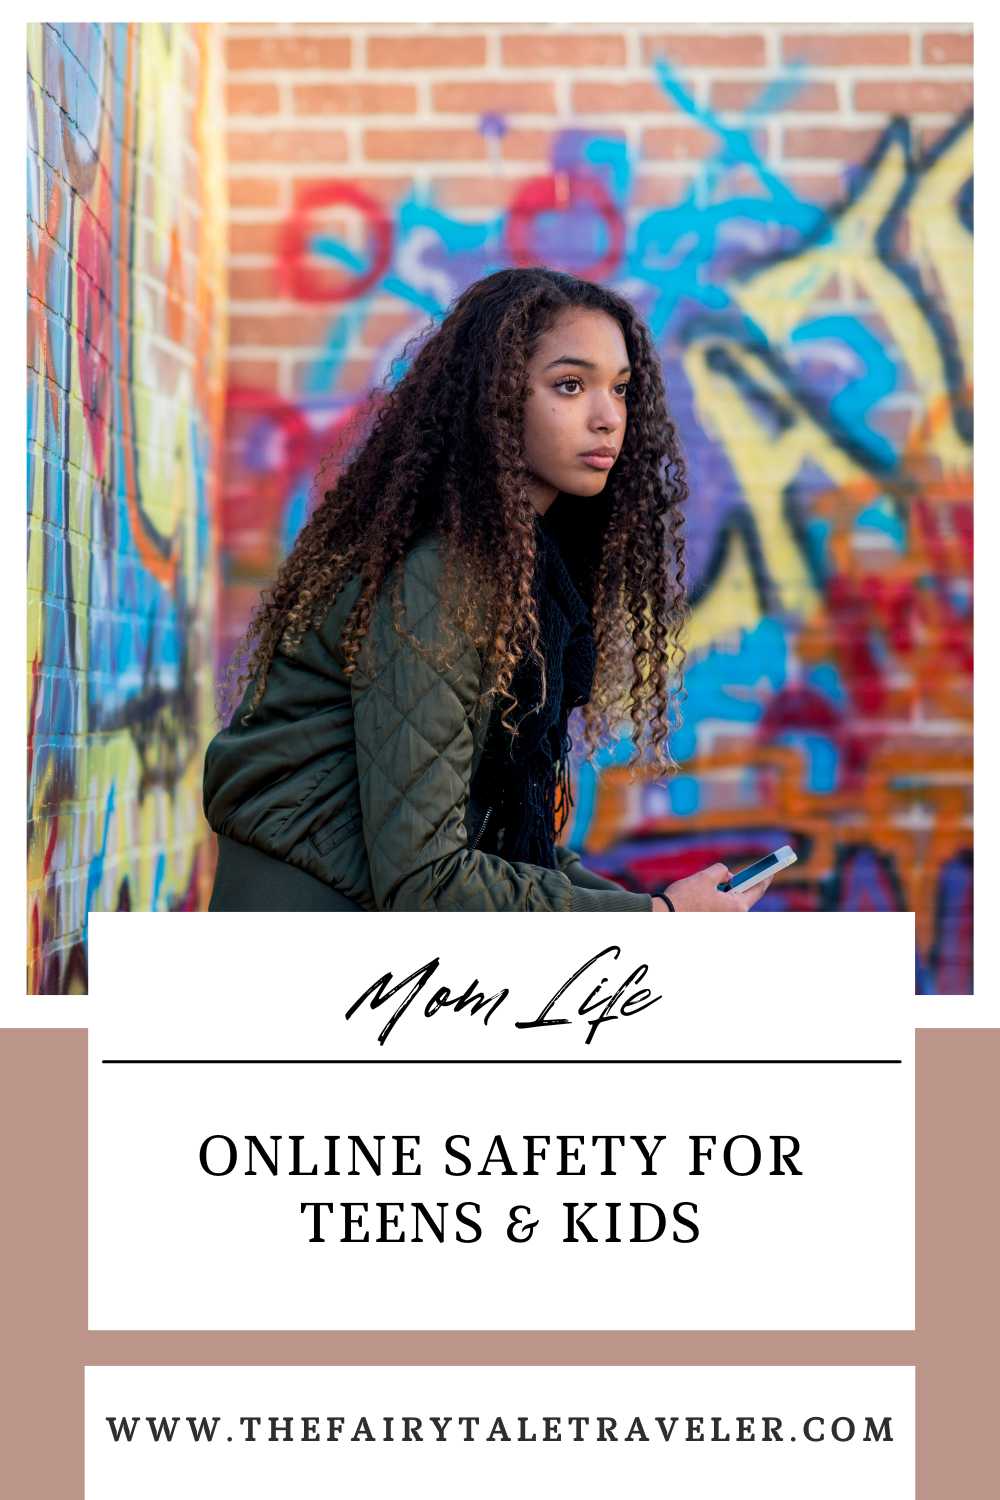 Internet safety for teens